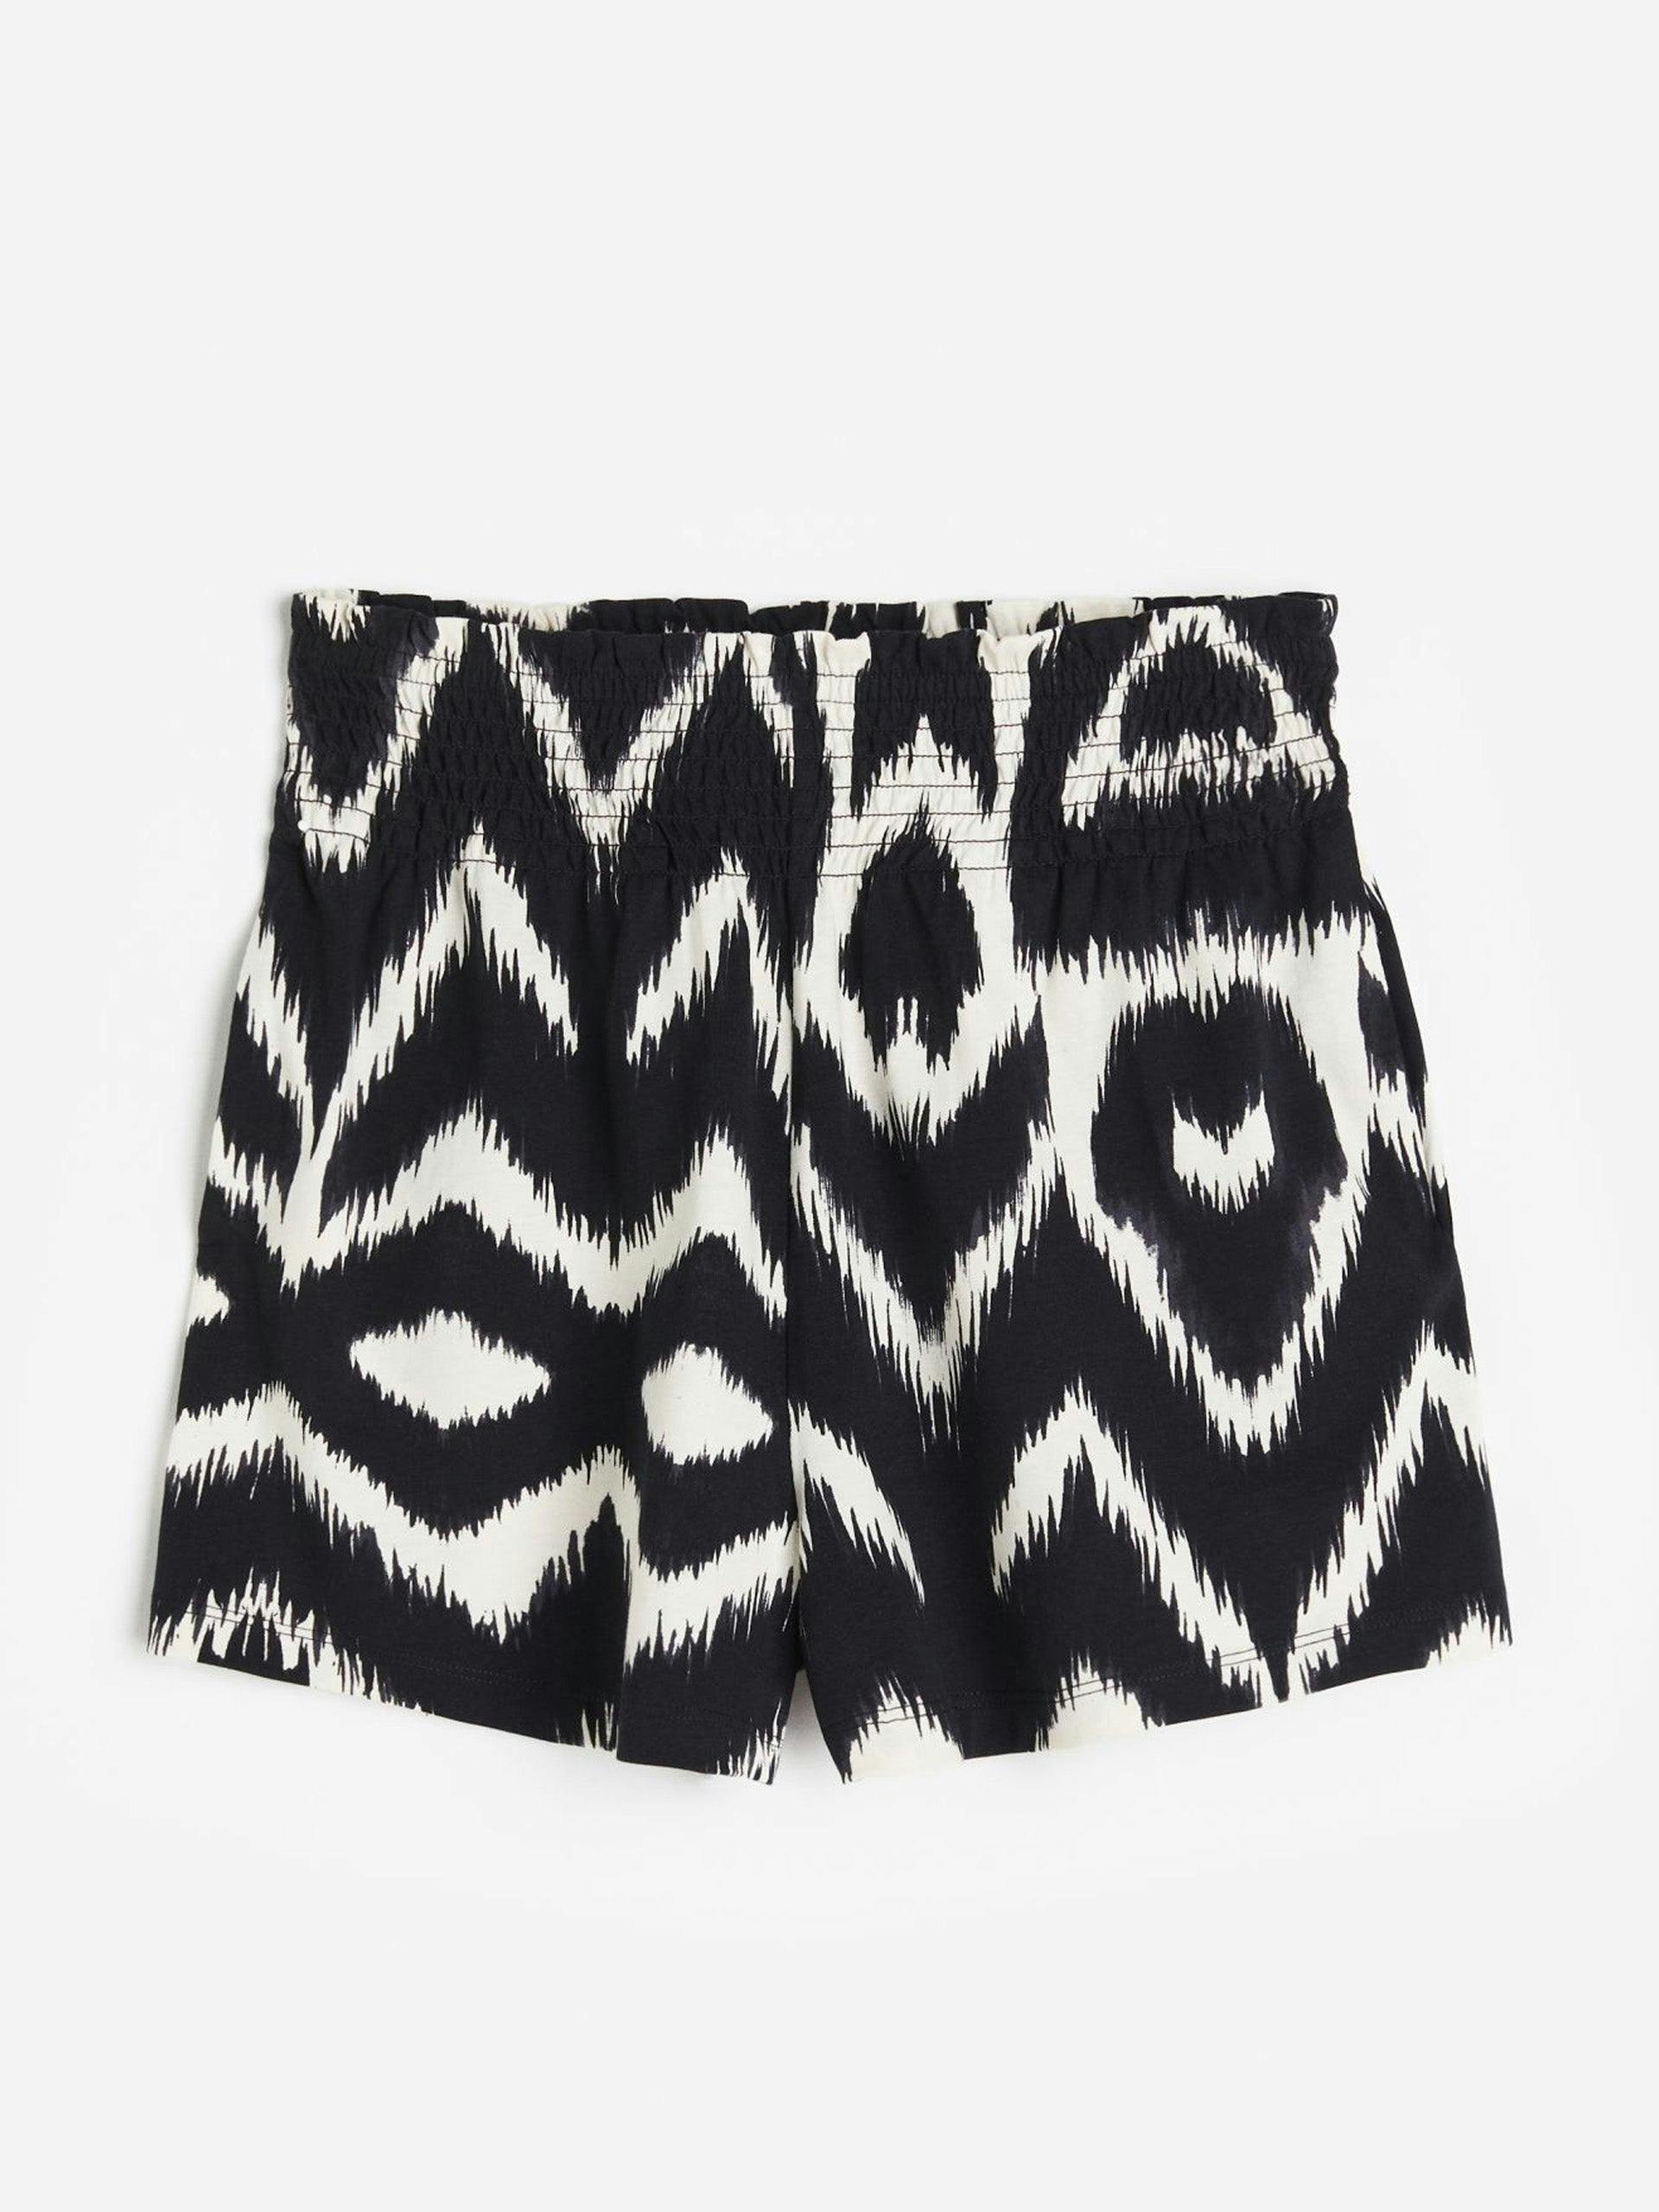 Black and white patterned shorts